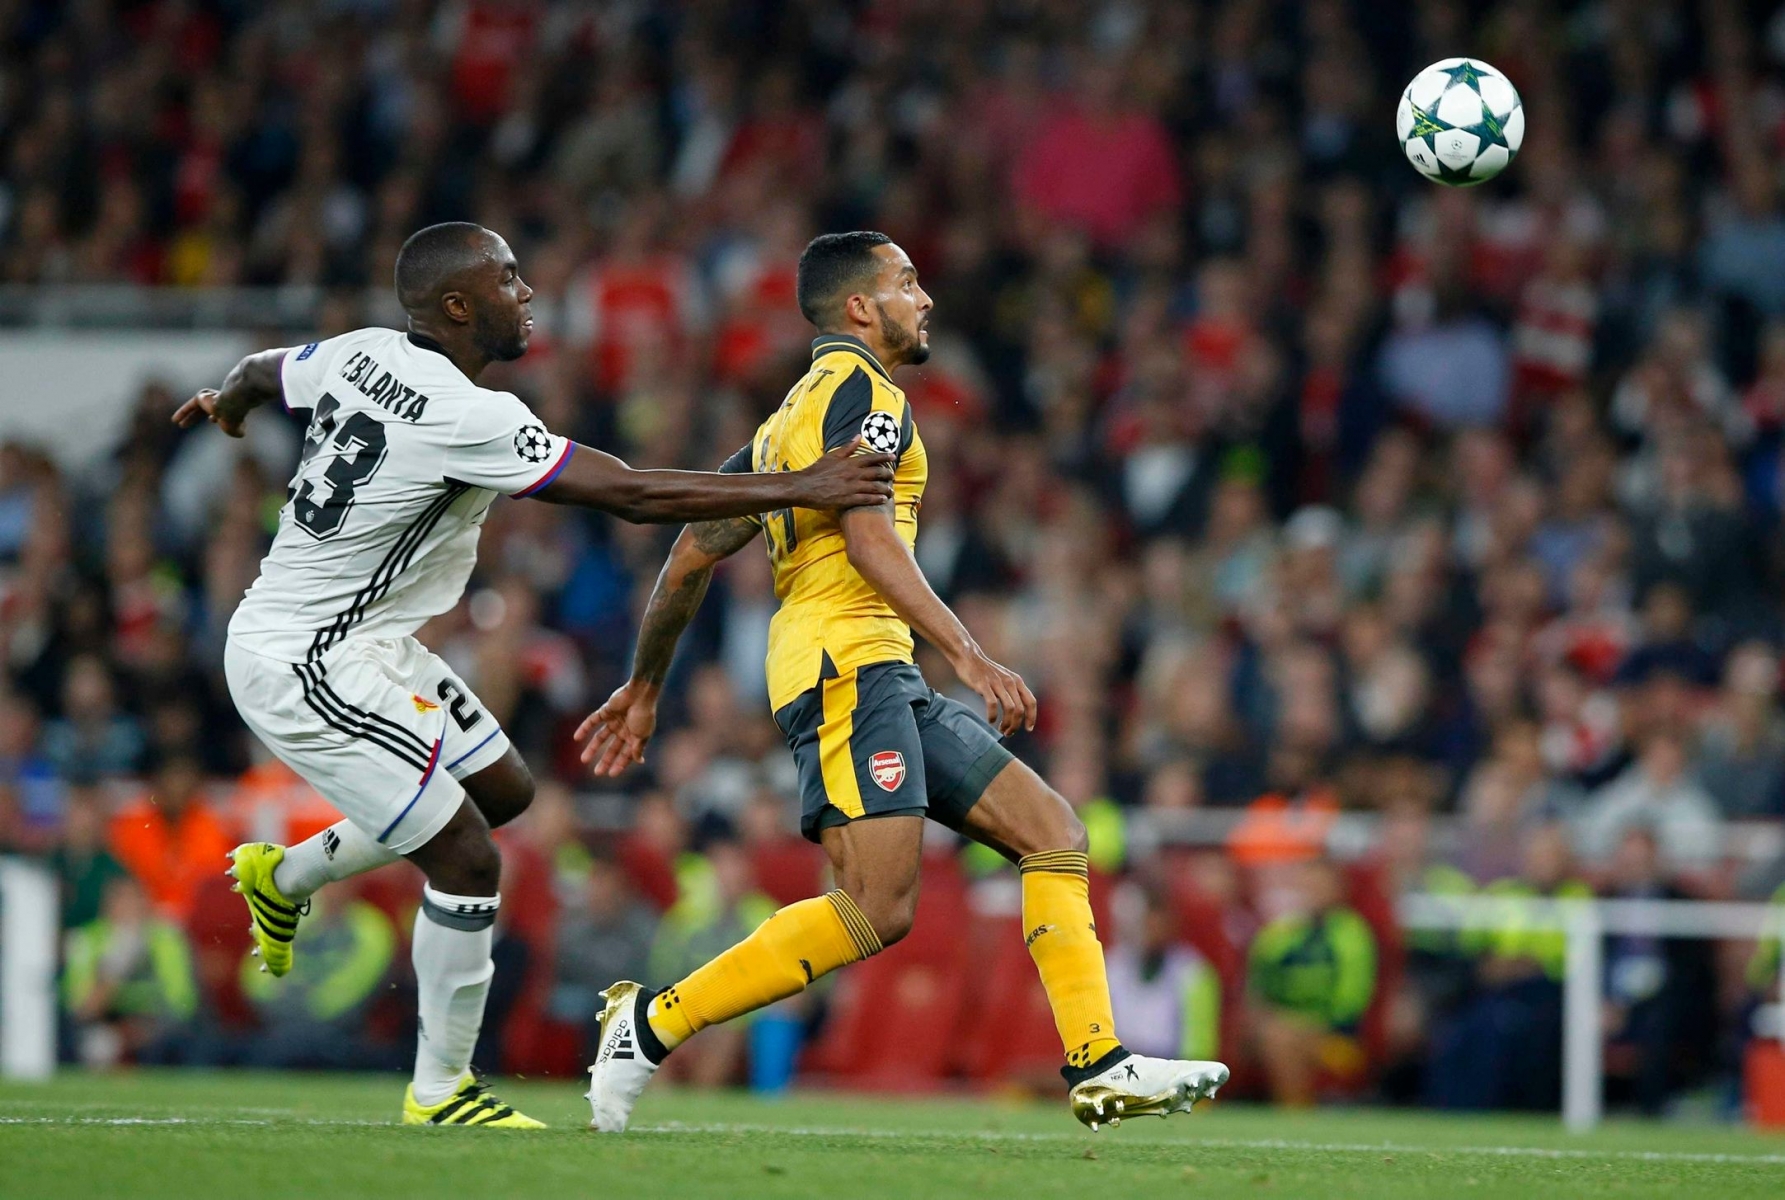 Basel's Eder Balanta, left, challenges Arsenal's Theo Walcott during the Champions League group A soccer match between Arsenal and Basel at the Emirates stadium in London, Wednesday, Sept. 28, 2016. (AP Photo/Alastair Grant) Britain Soccer Champions League